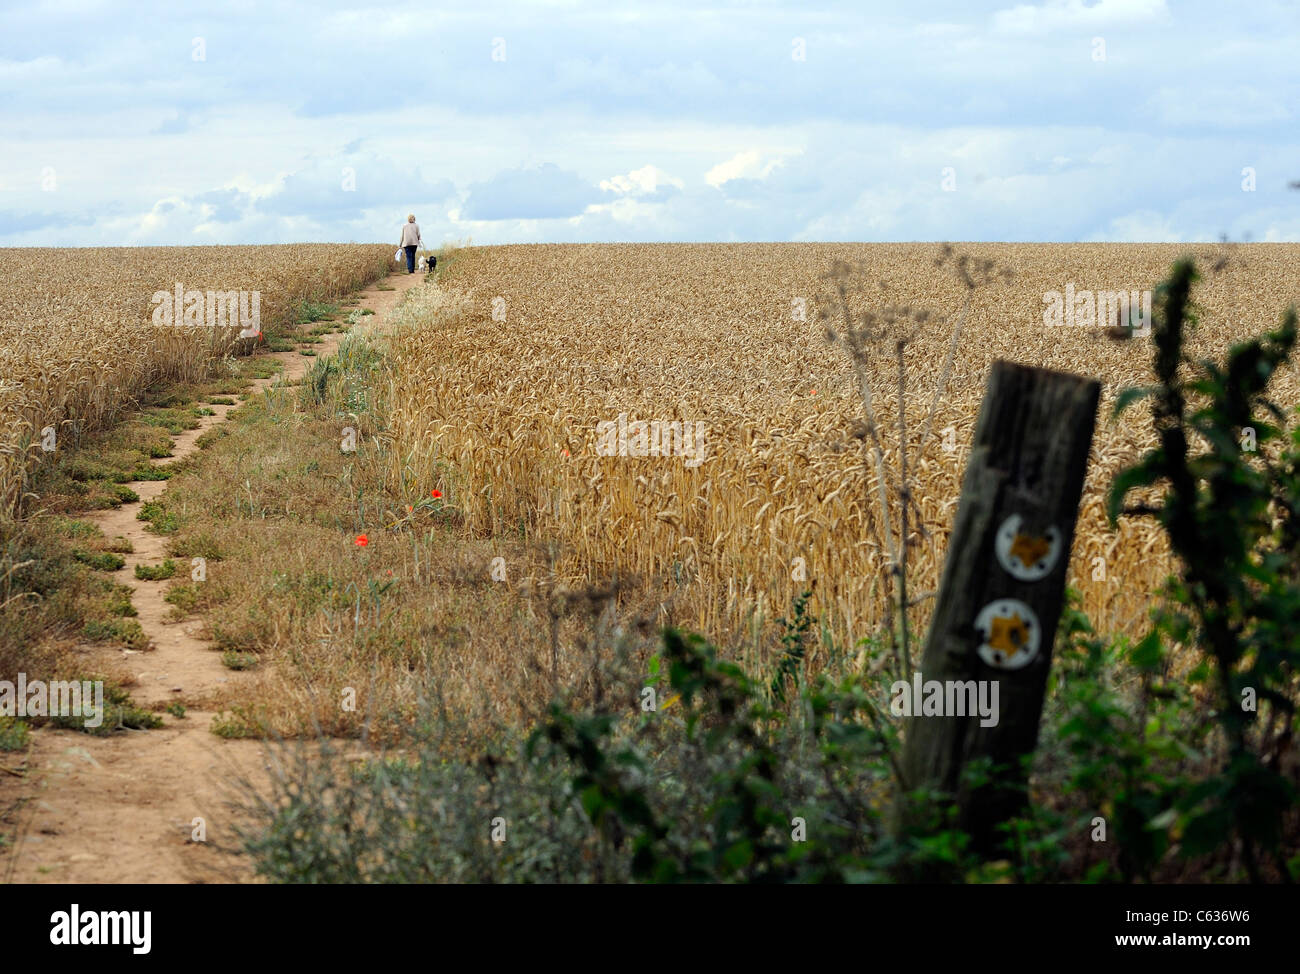 Post arrows showing direction of public footpaths across a field of corn and a woman walking her dogs. Stock Photo